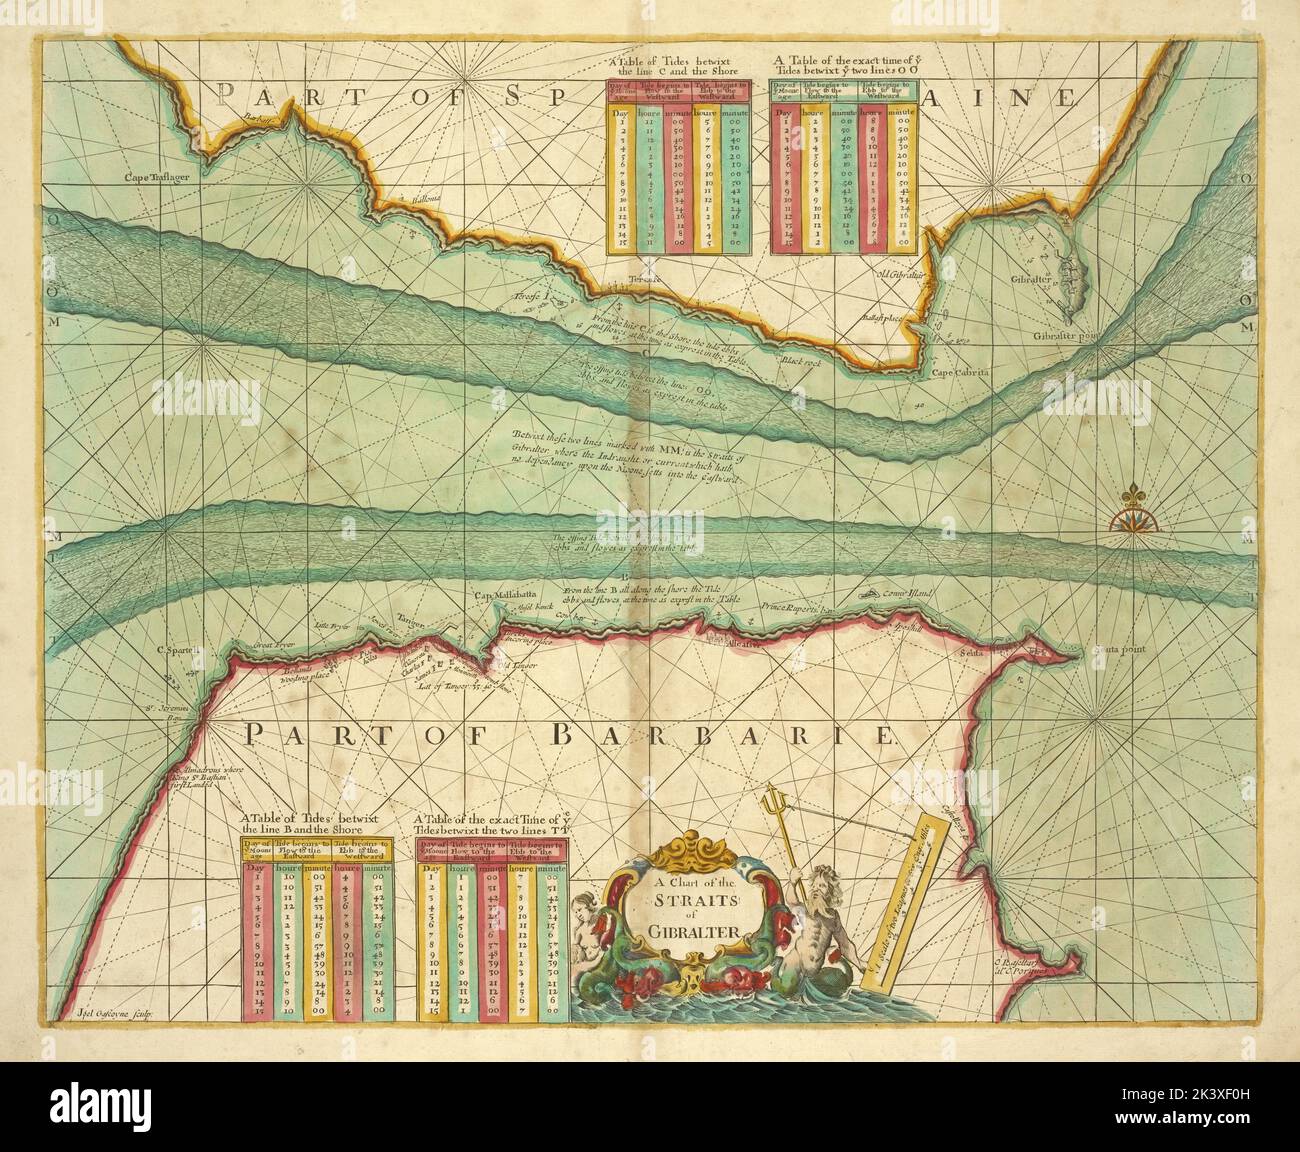 A chart of the STRAITS of GIBRALTER 1702 - 1707. Cartographic. Maps, Nautical charts. Lionel Pincus and Princess Firyal Map Division. Spain, Morocco, Gibraltar, Strait of Stock Photo